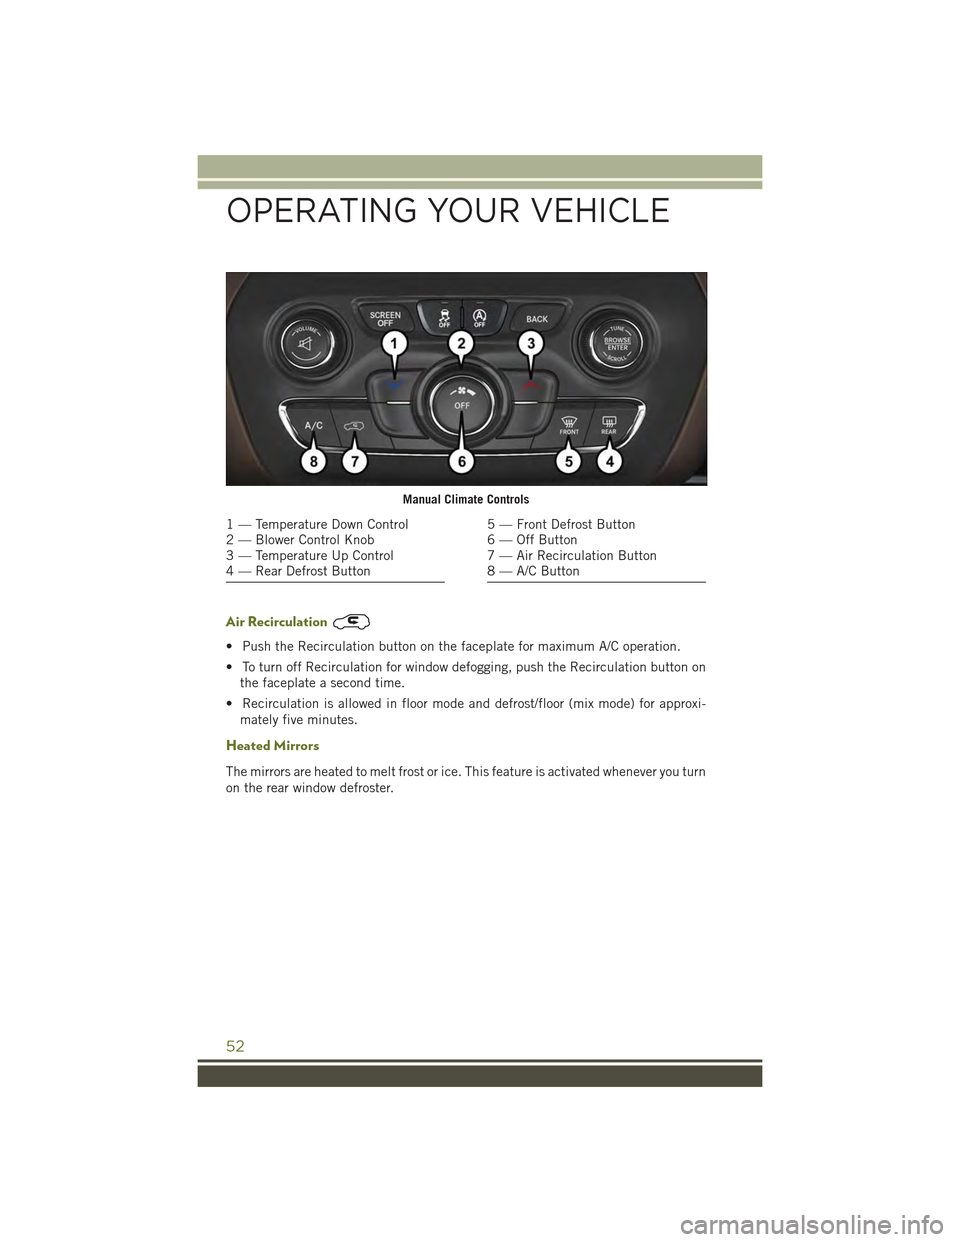 JEEP CHEROKEE 2015 KL / 5.G User Guide Air Recirculation
• Push the Recirculation button on the faceplate for maximum A/C operation.
• To turn off Recirculation for window defogging, push the Recirculation button on
the faceplate a sec